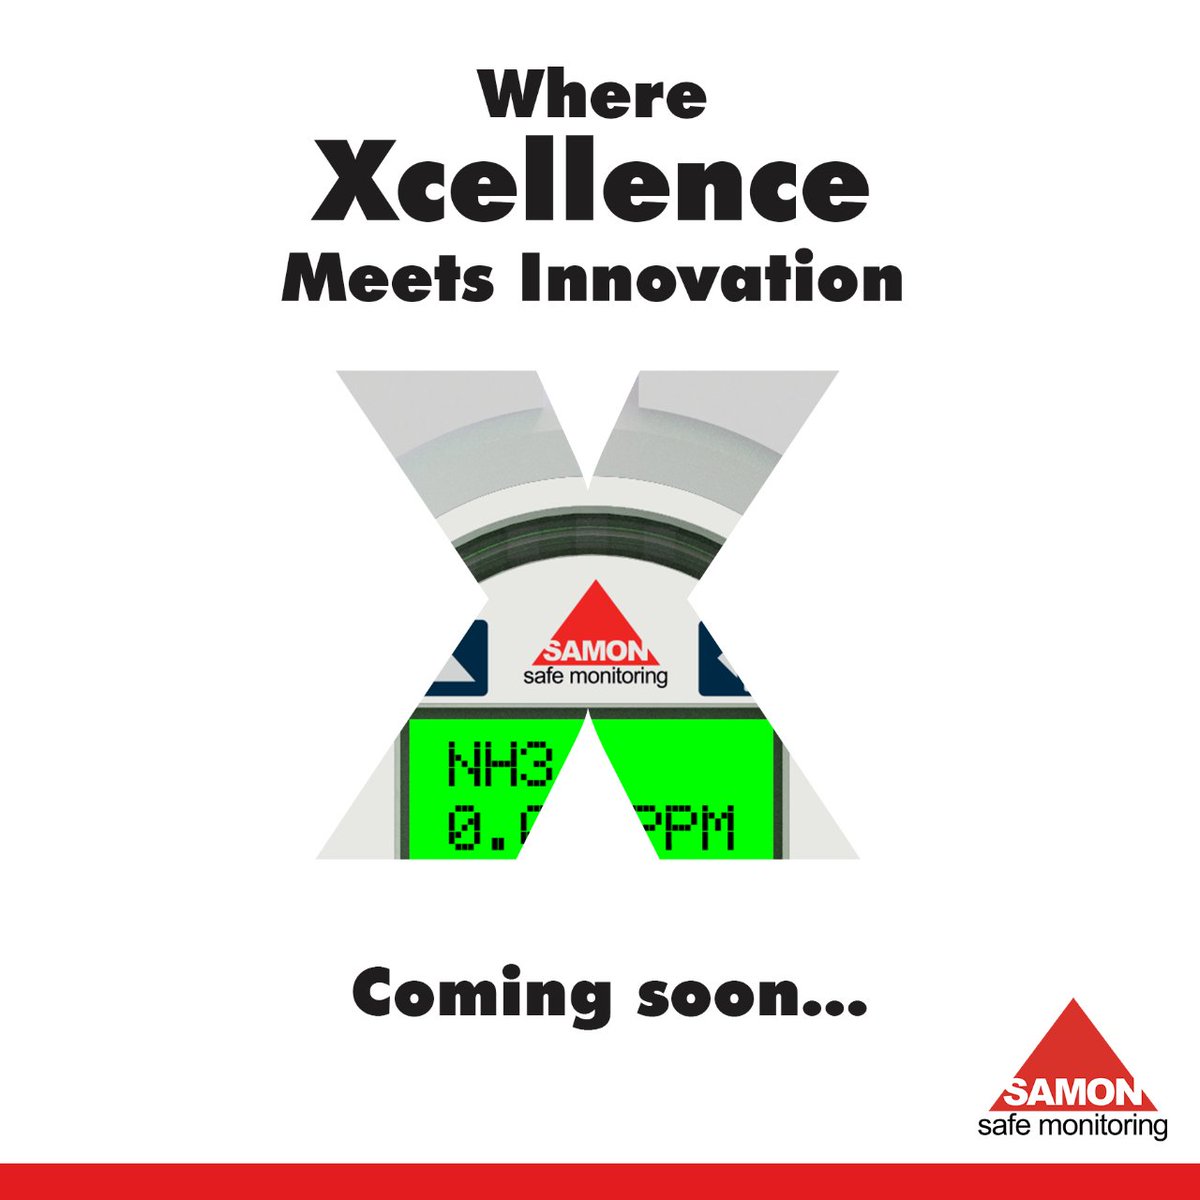 X marks the spot for unparalleled Xcellence. Stay tuned for a game-changer that blends innovation with groundbreaking technology. We can't wait to tell you more soon...

#samon #excellence #innovation #gasdetection #atex #IECEx #safemonitoringgroup #smg